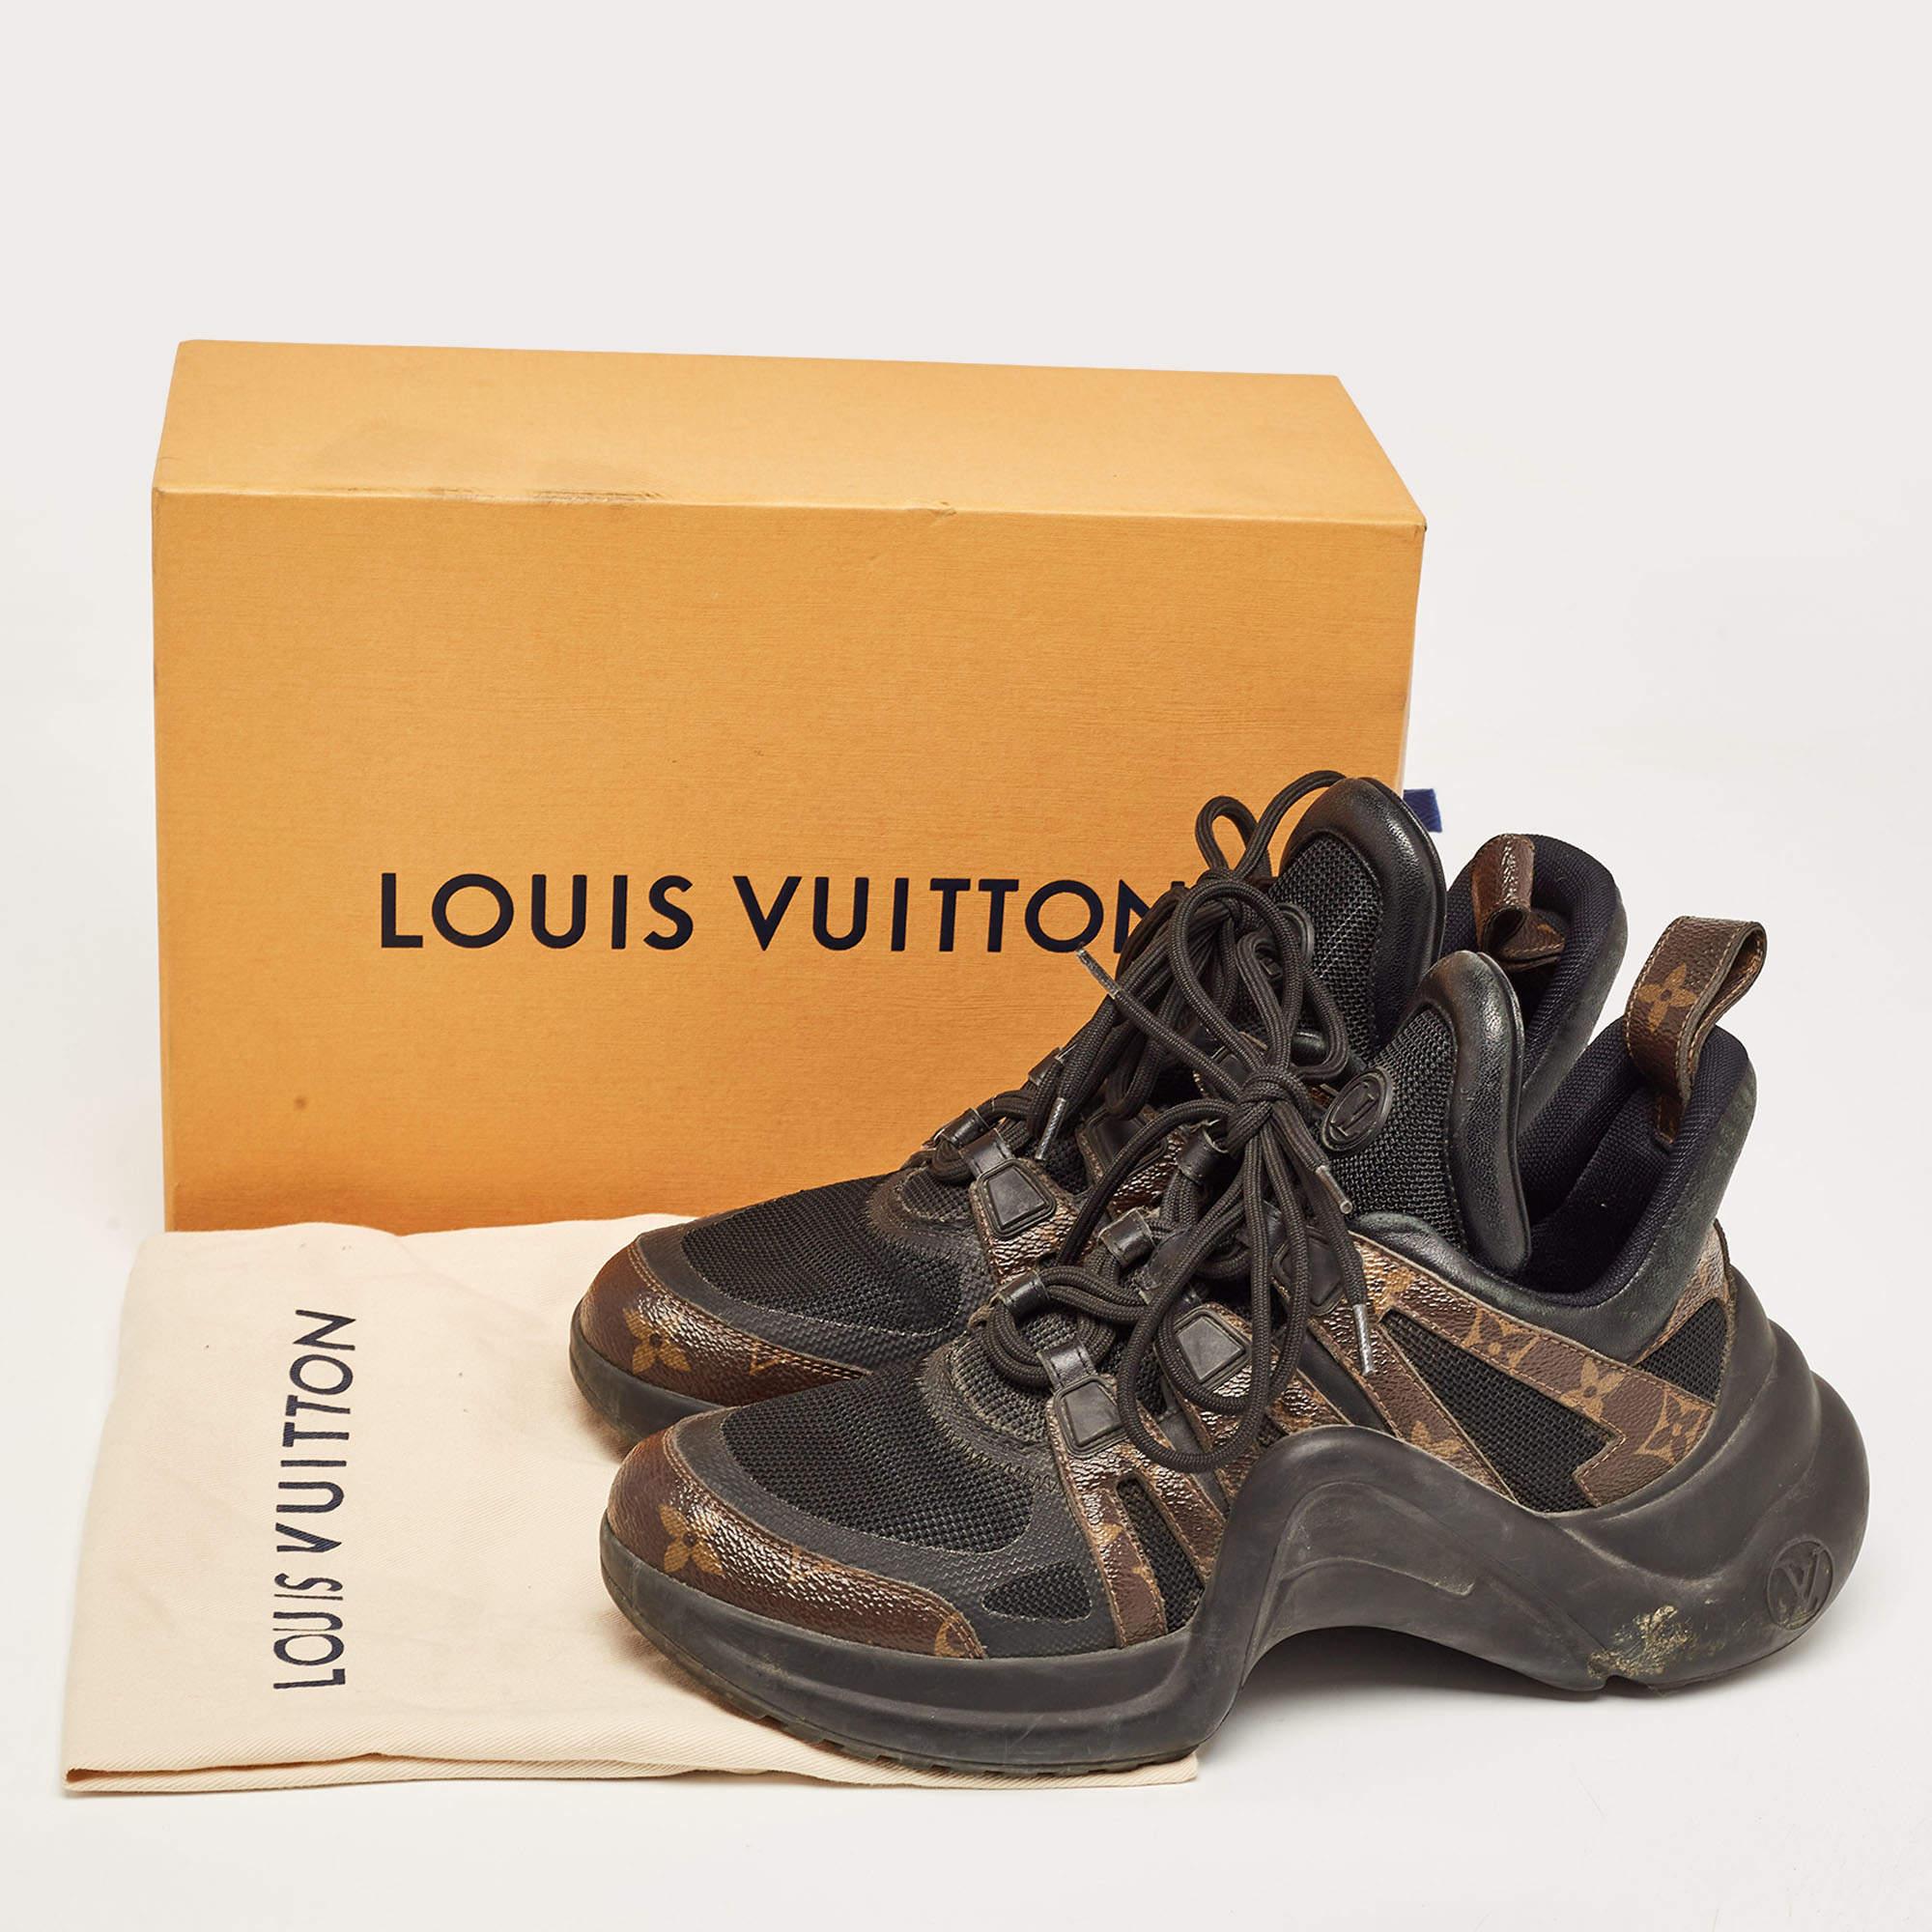 Louis Vuitton Black/Brown Mesh and Monogram Canvas Archlight Sneakers Size 39 4